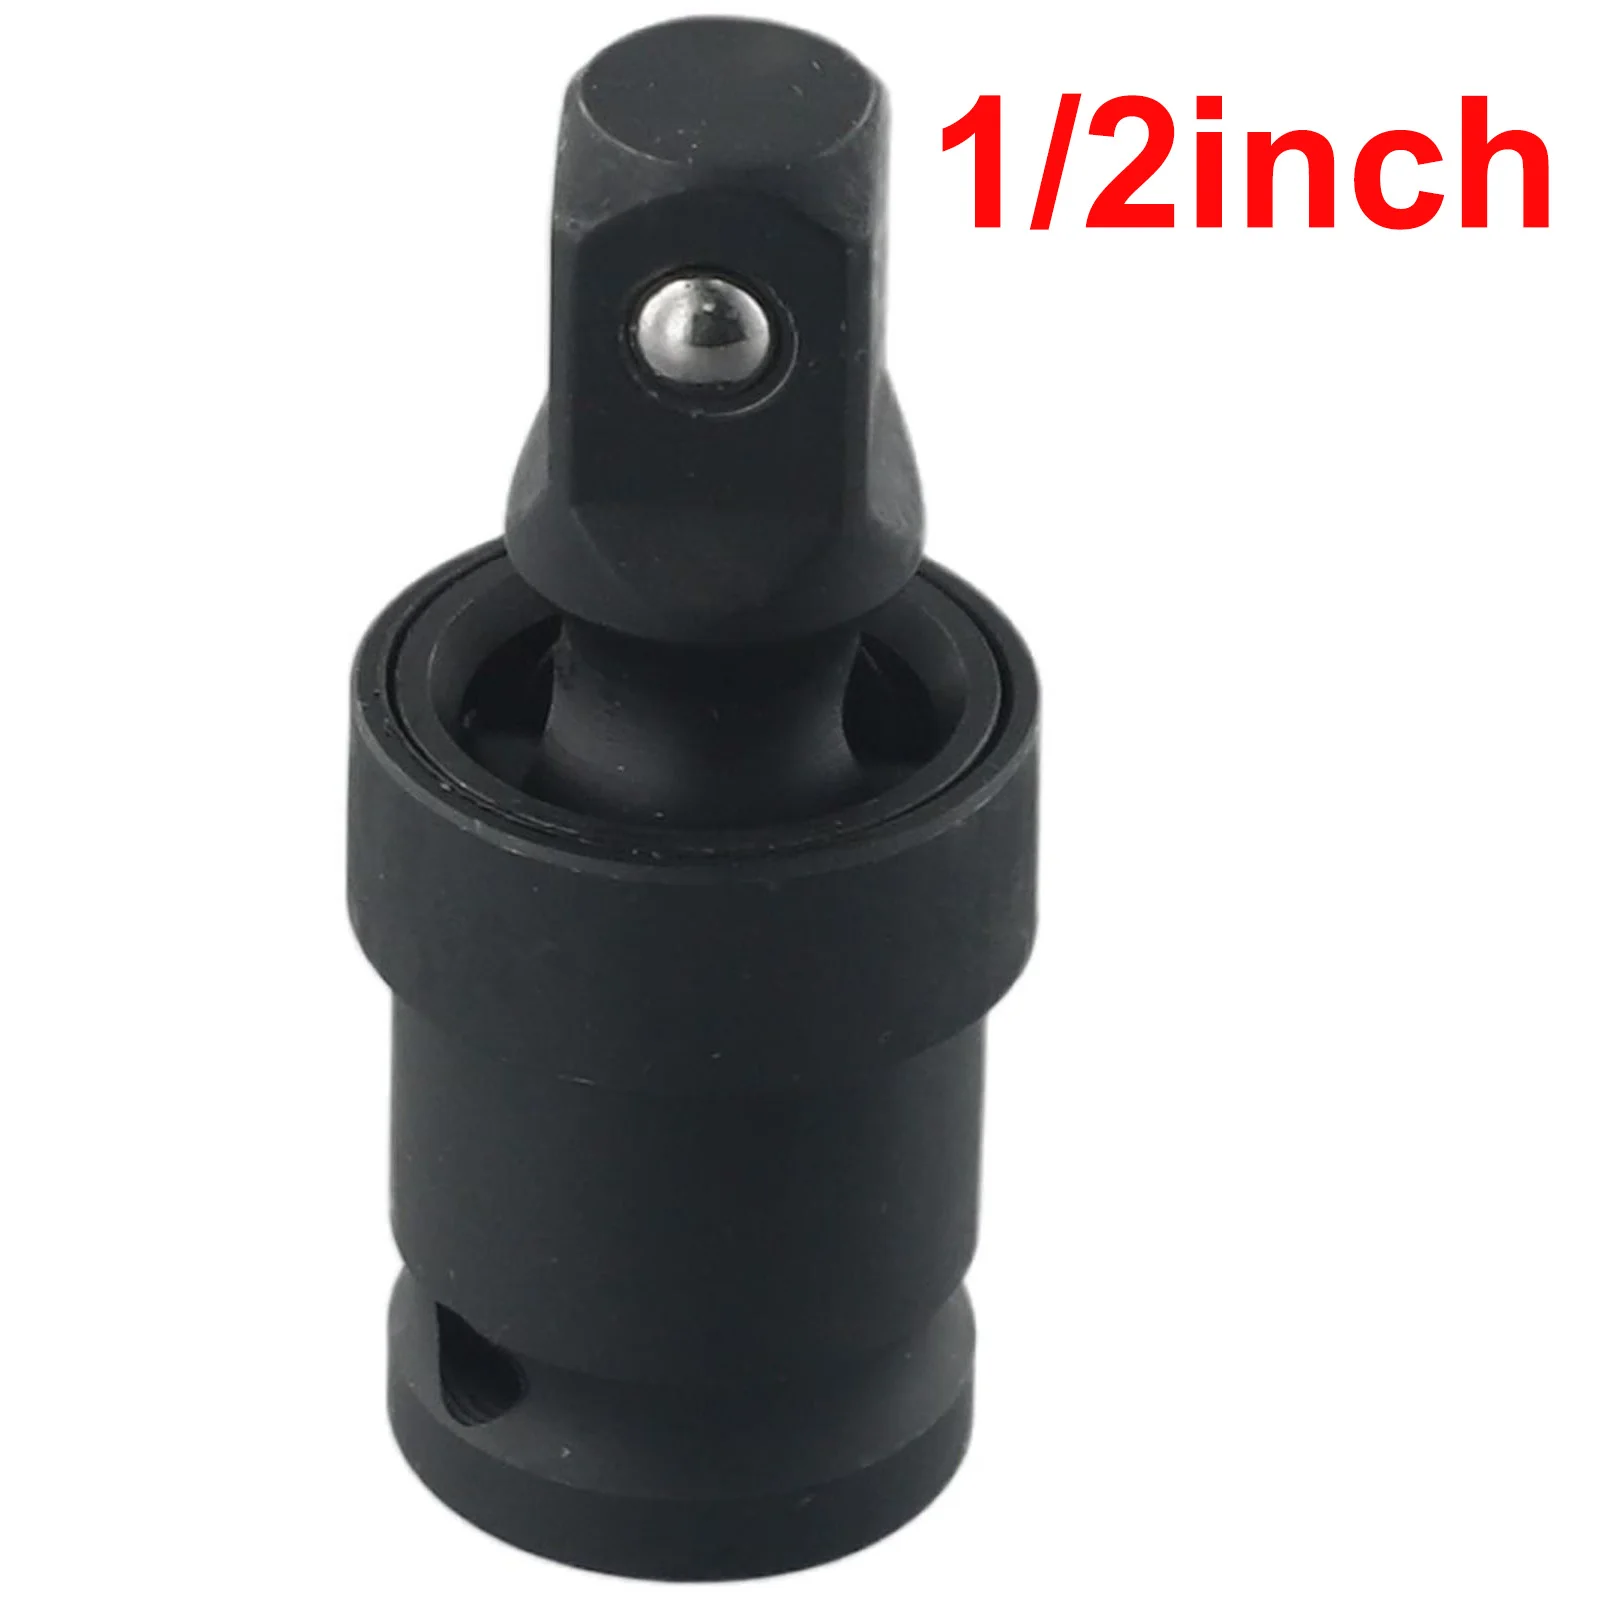 

Air-Cannon Pneumatic Drive Joint Adapter 360 Degree Rotary Joint Electric Wrench Socket Accessories Tool 1/2 Inch